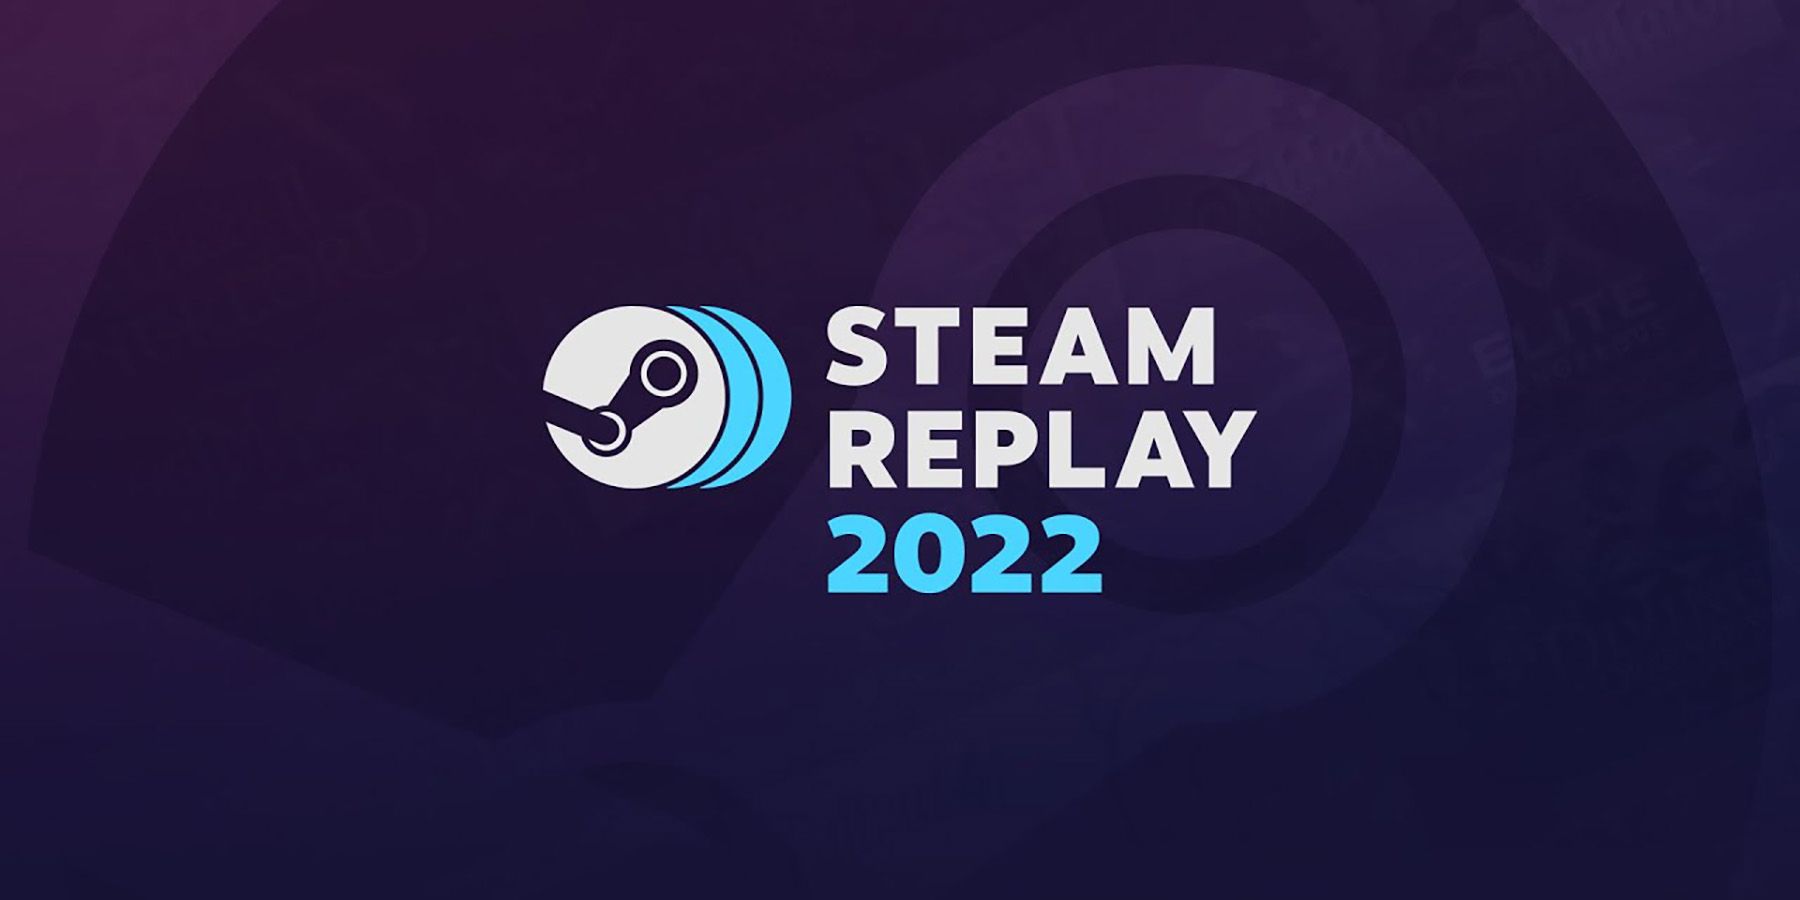 steam replay logo from 2022